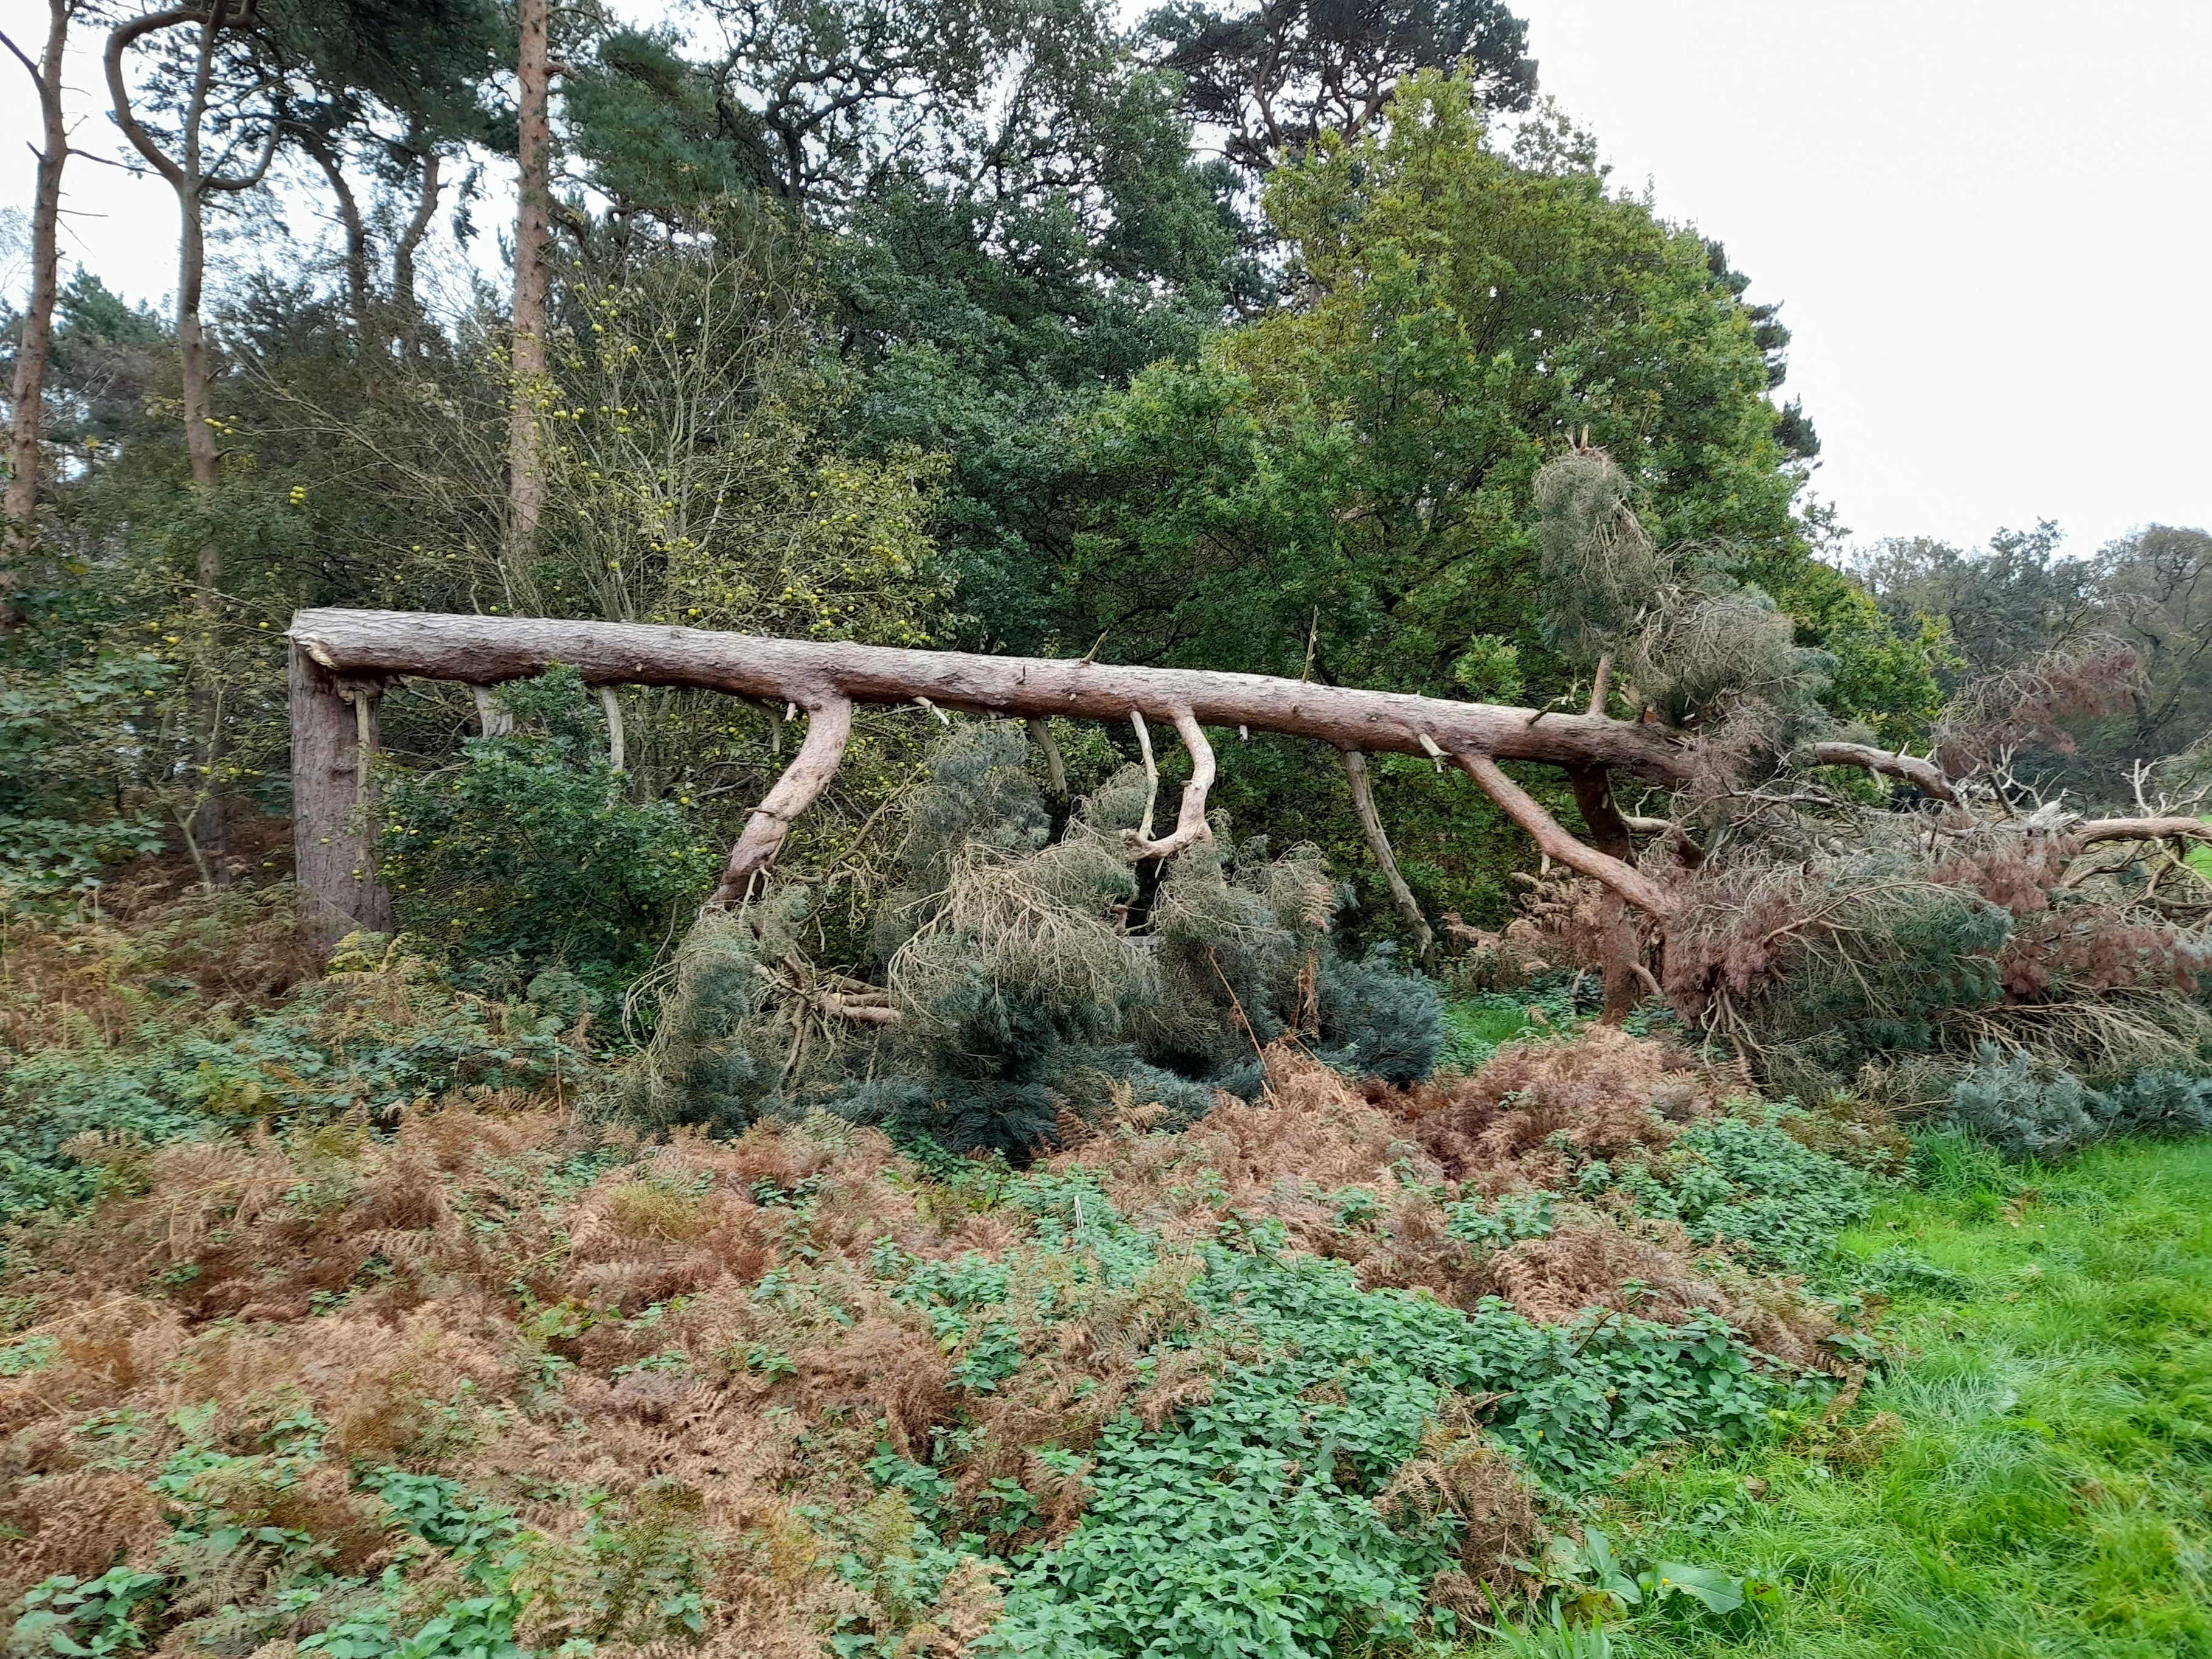 Damaged and fallen tree in Pretty Corner Woods after storm damage in October 2020